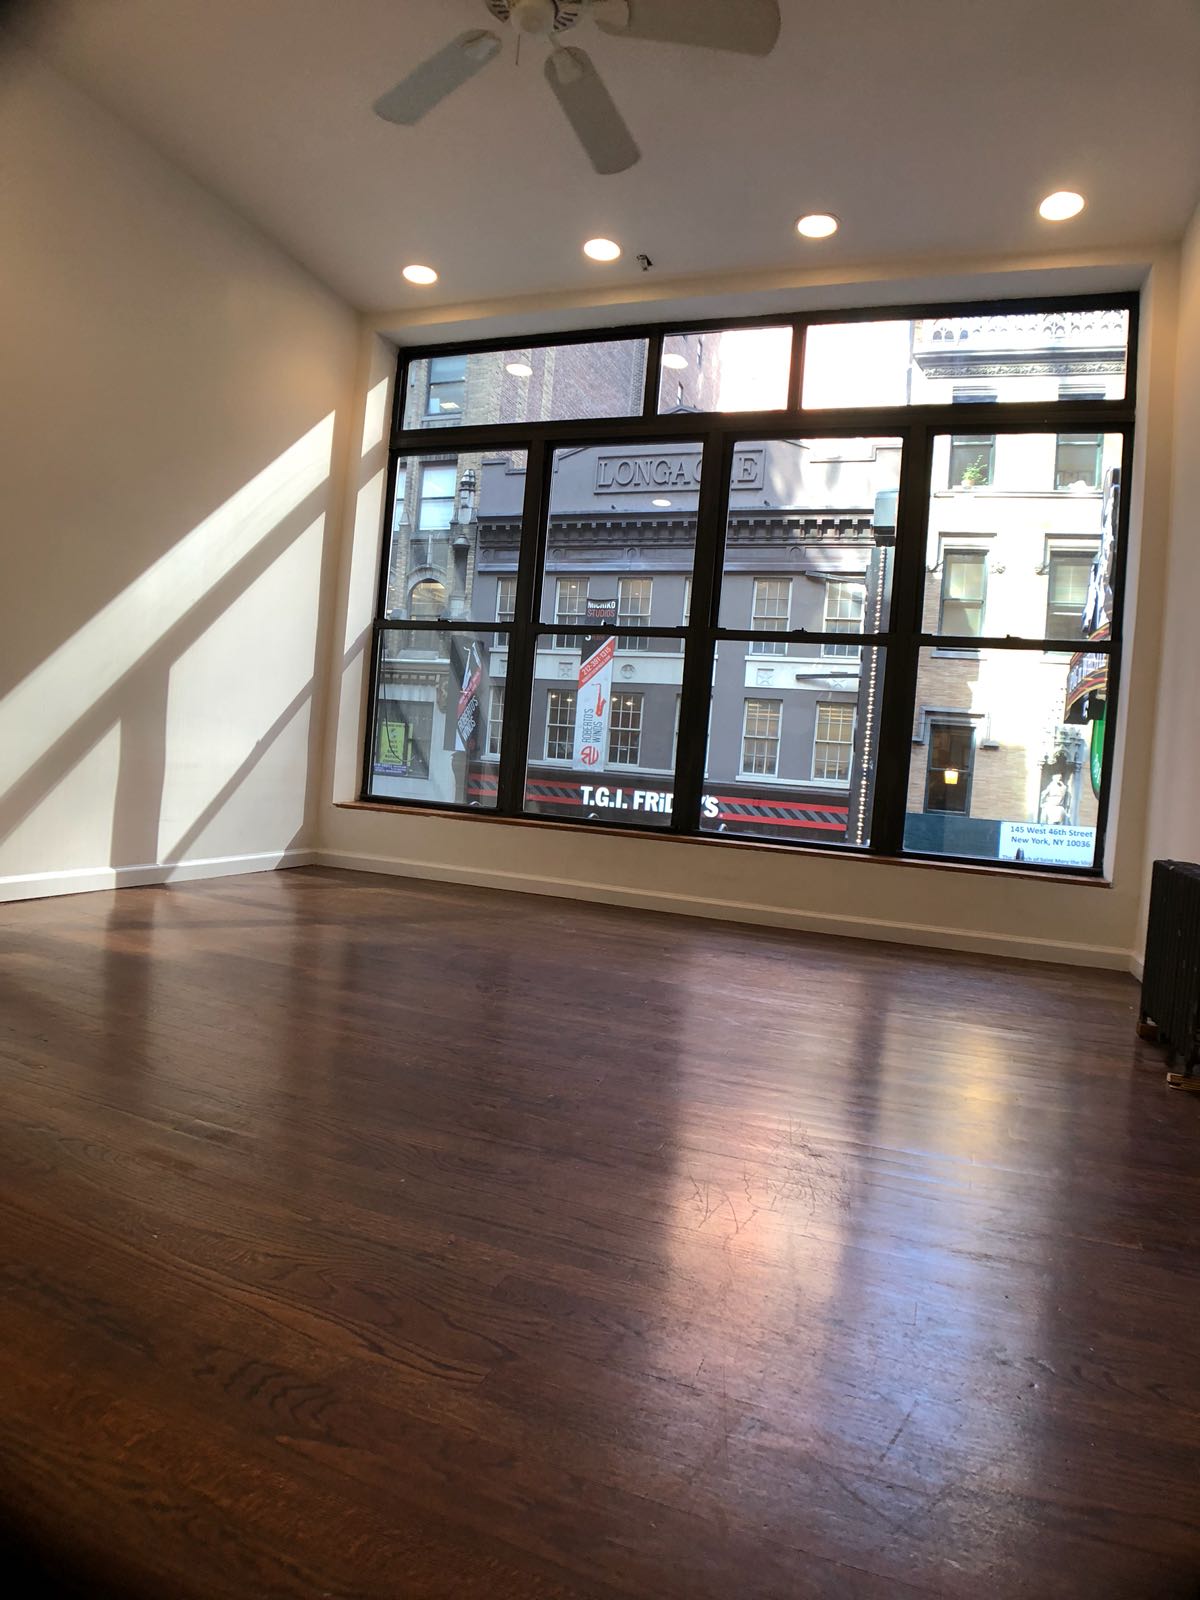 NEWLY BUILT OUT SECOND FLOOR RETAIL SPACE

*NO BROKER FEE* 

RENT: 
$4,200/month 

SIZE: 
600 SF

LOCATION: 
46th Street between 6th & 7th Avenue

COMMENTS:
- Newly Built with Hardwood Floors and White Walls
- Brand New Bathroom
- Full Kitchen in Place

PERFECT FOR:
- Hair Salon
- Nail Salon
- Massage 
- Spa
- Acupuncture 
- General Office Use
- Tech Company
- Start-Up Companies
- Financial Office
- Accounting Firm
- Law Firm

*ALL USES CONSIDERED*

CONTACT: 
Aaron Aziz (516) 355-8018 
Access to all commercial spaces in any of the 5 Boroughs.
Feel free to contact me with your requirements or any questions you may have.